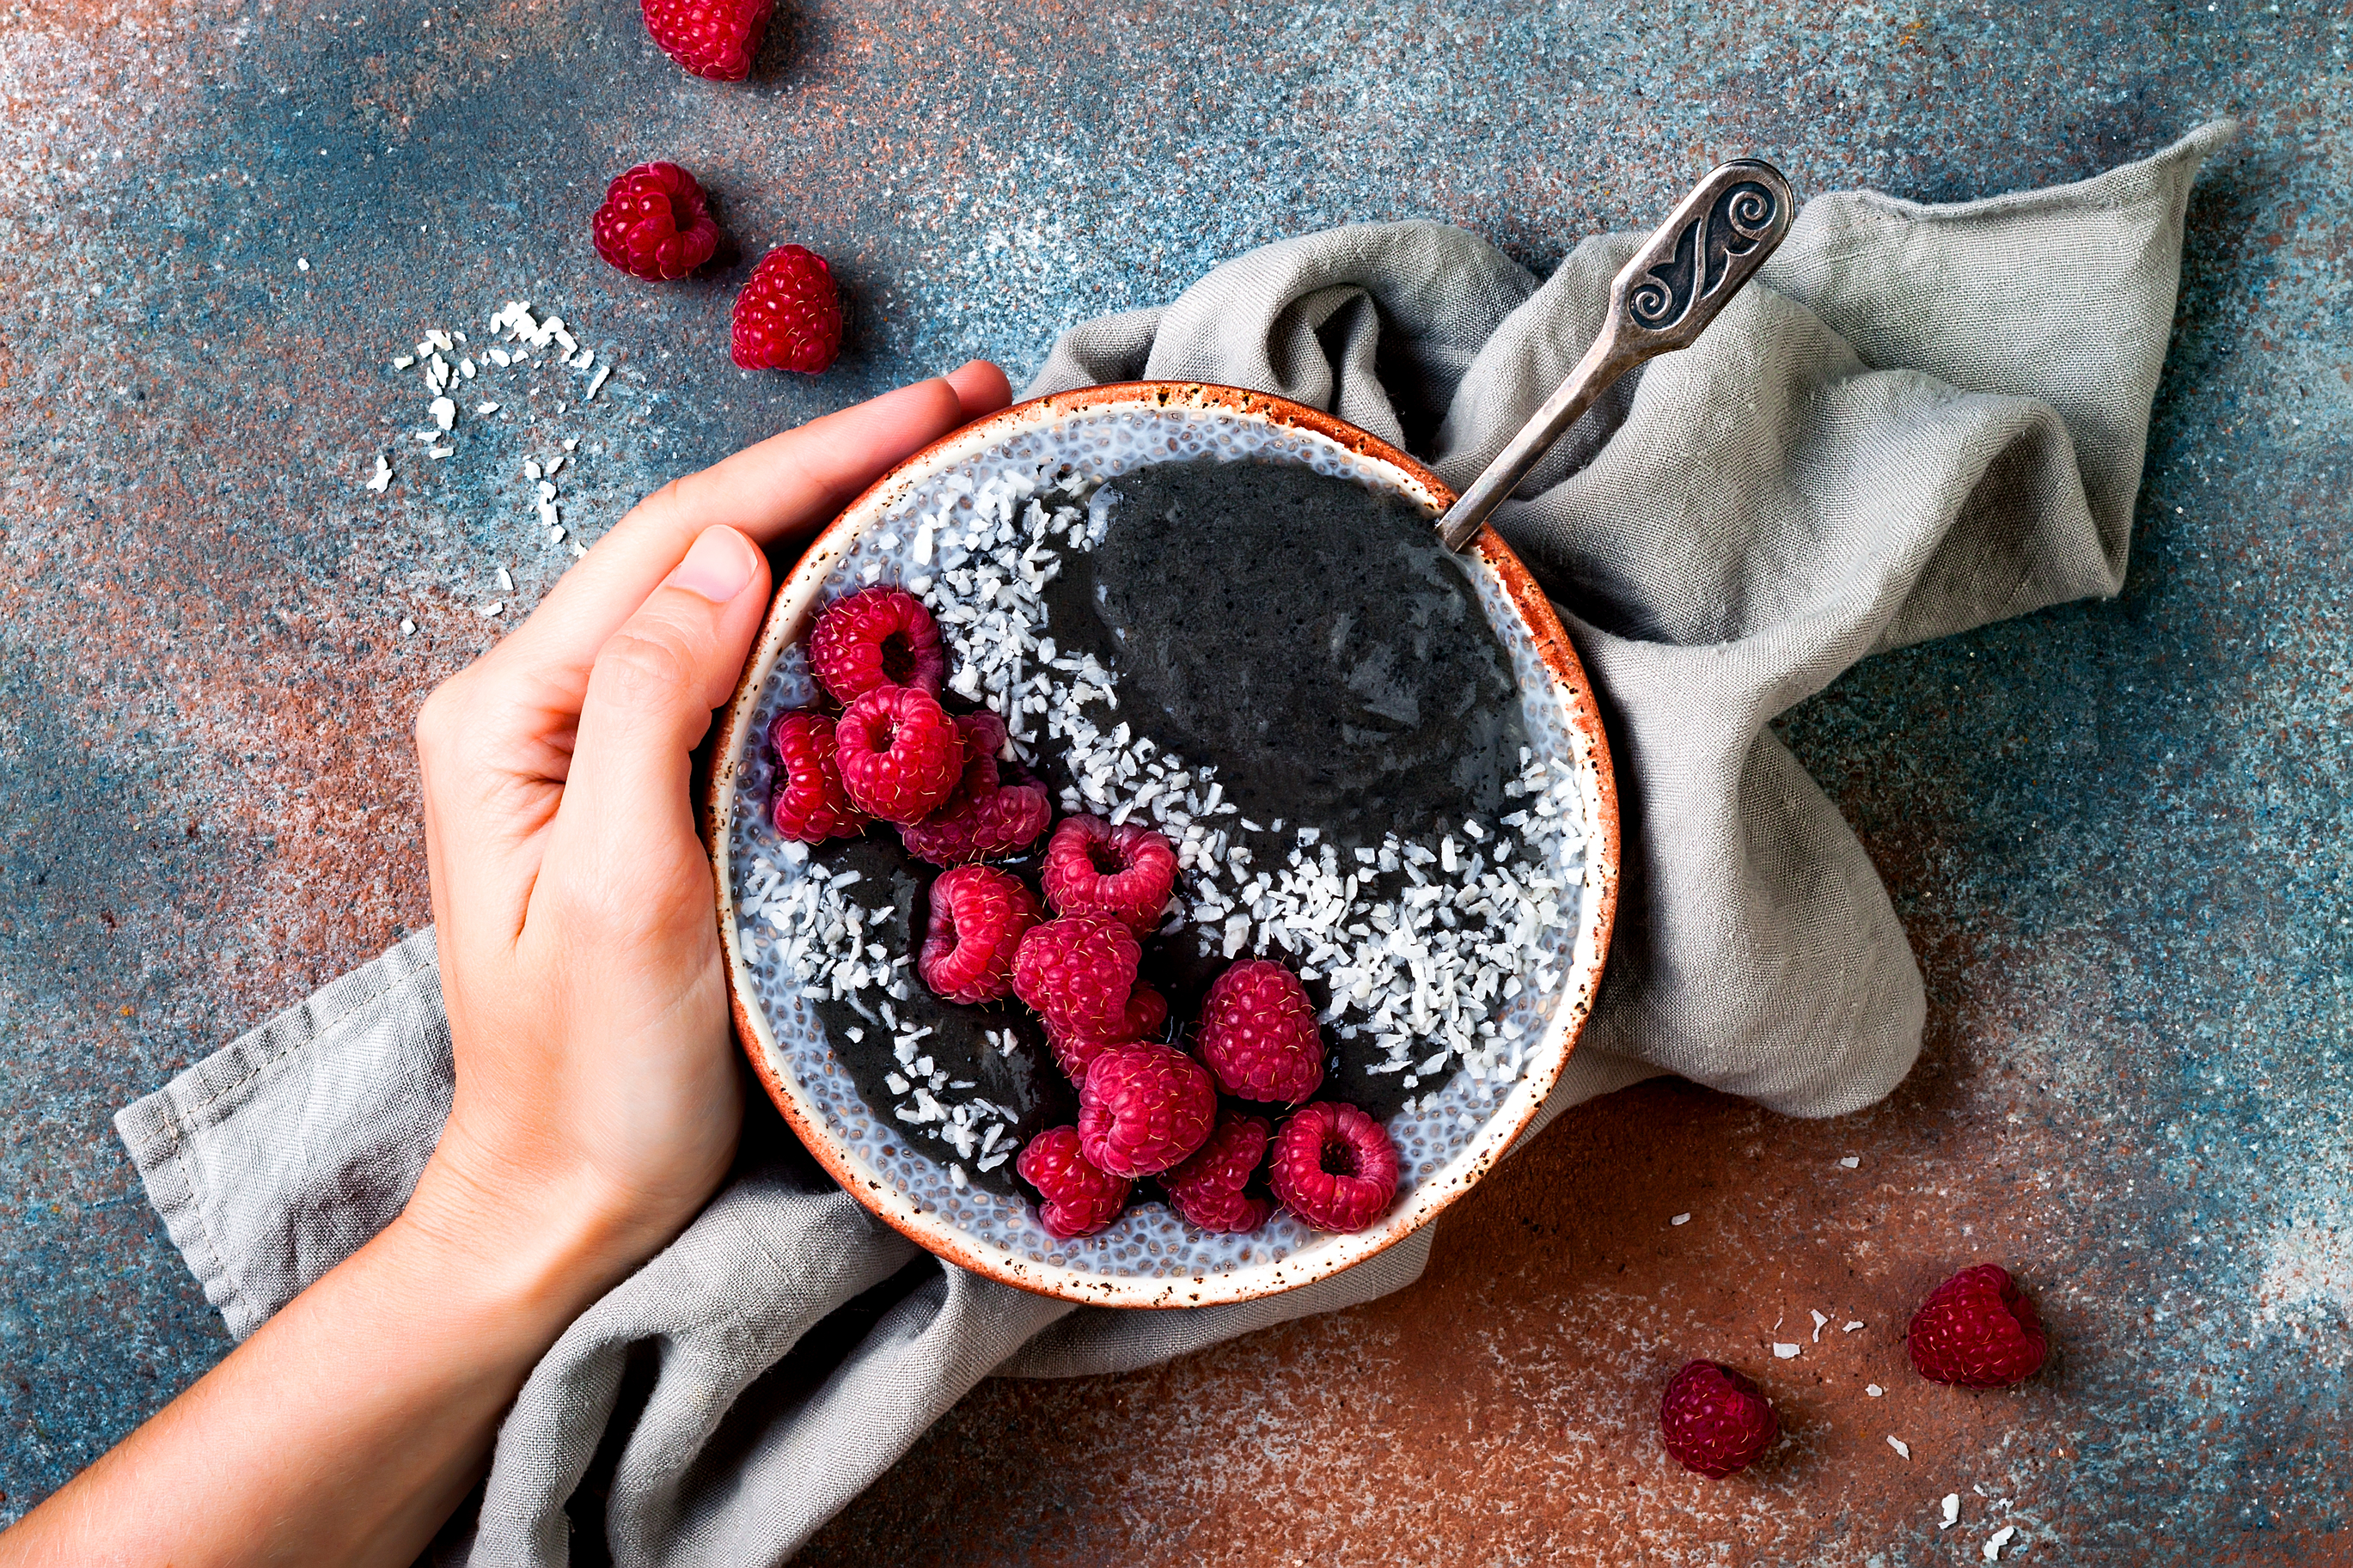 dreamstime l 126204502 - Cooking With Activated Charcoal